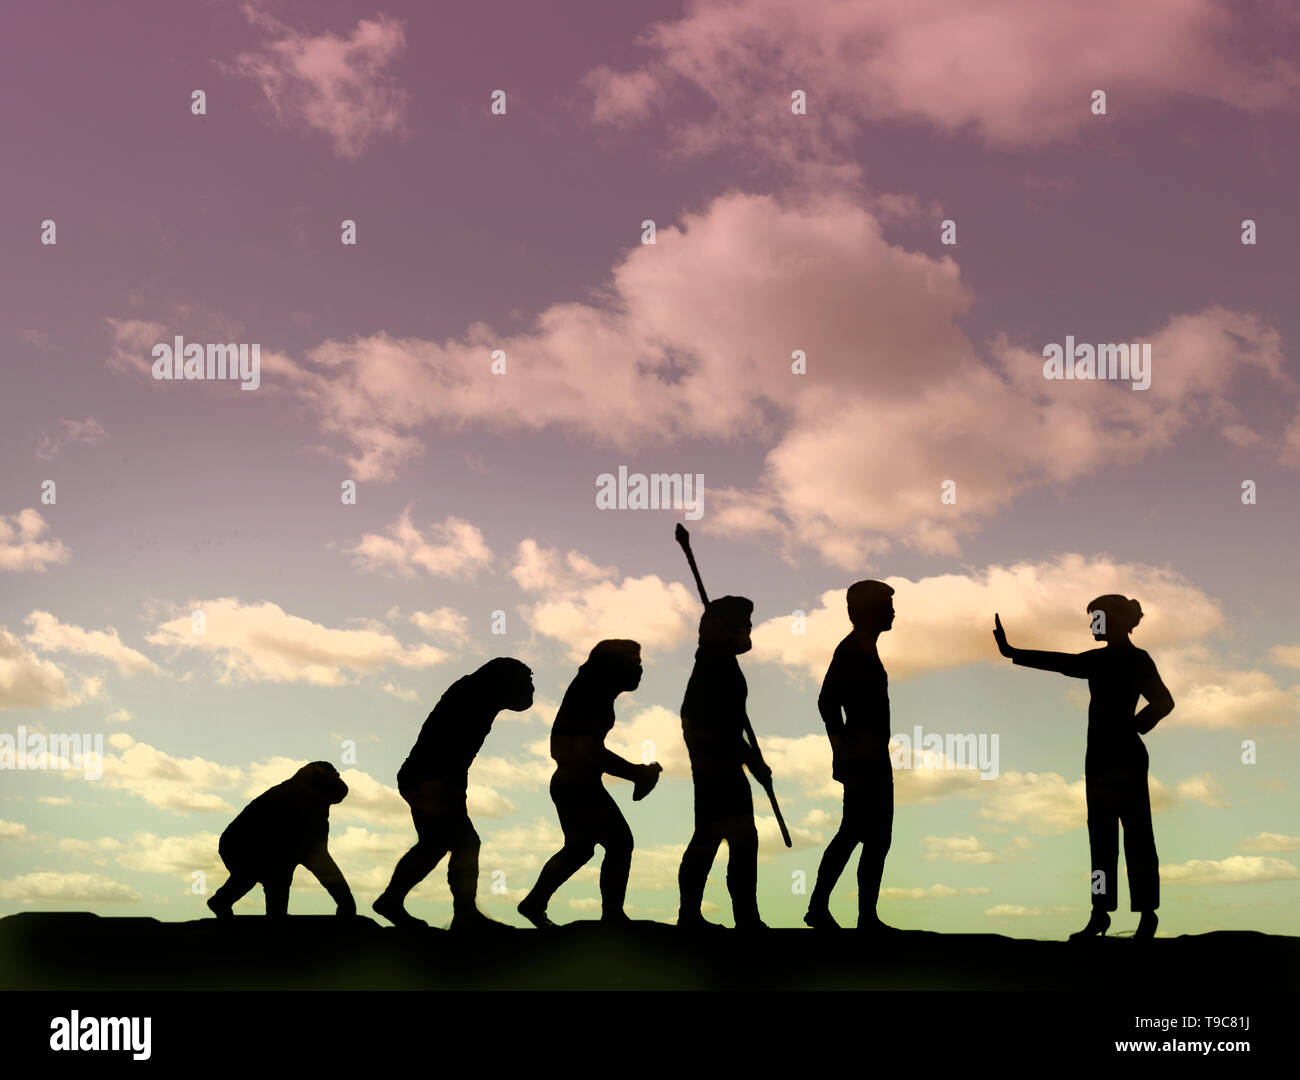 concept image of evolution of man with a woman stopping the progress depicting a halt to progress Stock Photo